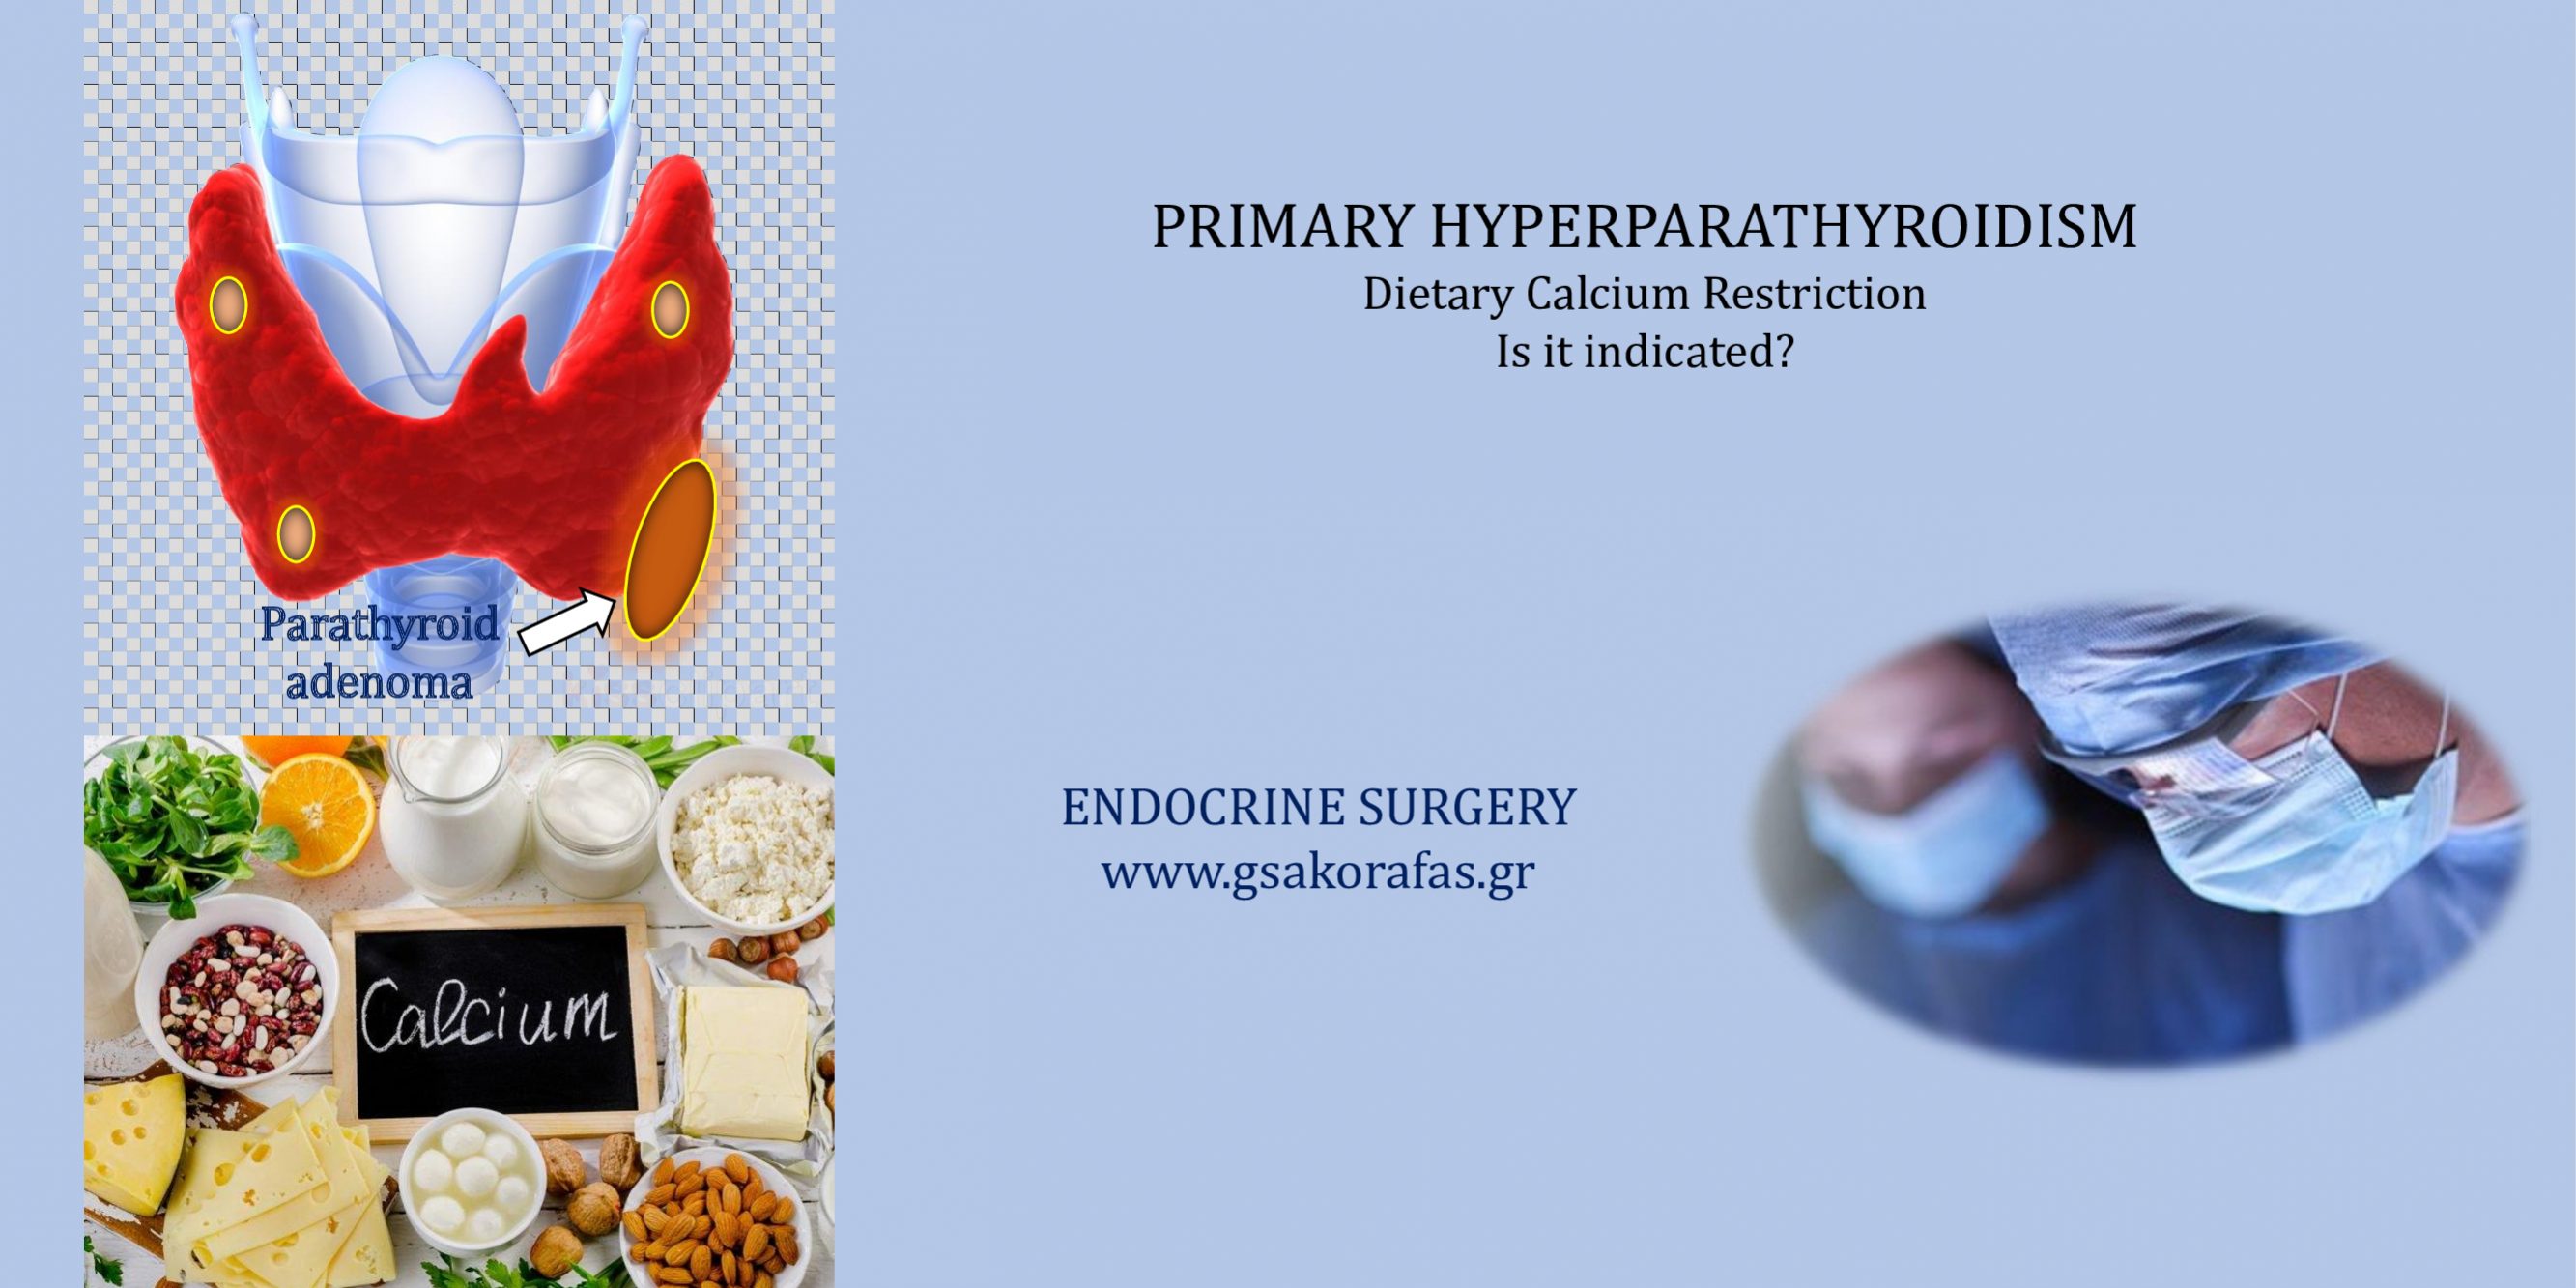 Primary hyperparathyroidism – Is dietary calcium restriction indicated?